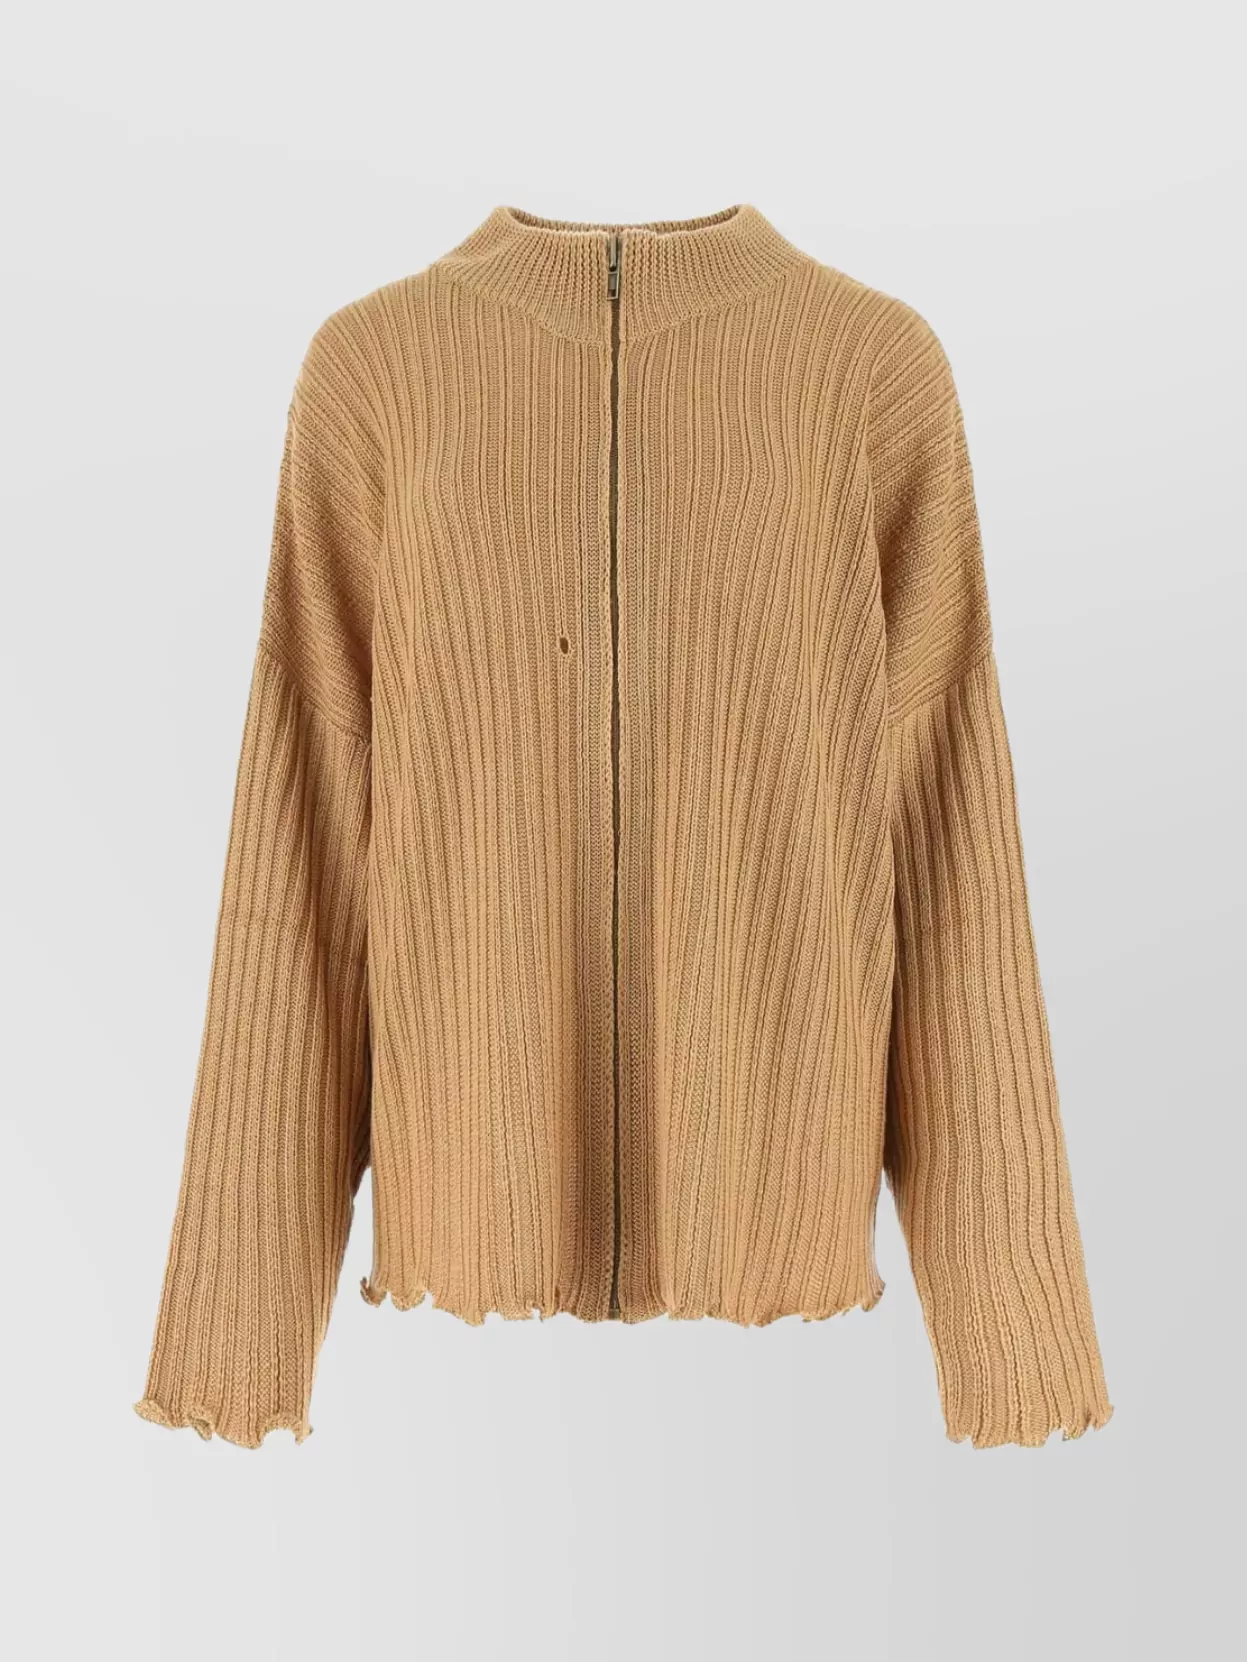 Shop Maison Margiela Oversized Knit Cardigan With Long Sleeves And Ribbed Texture